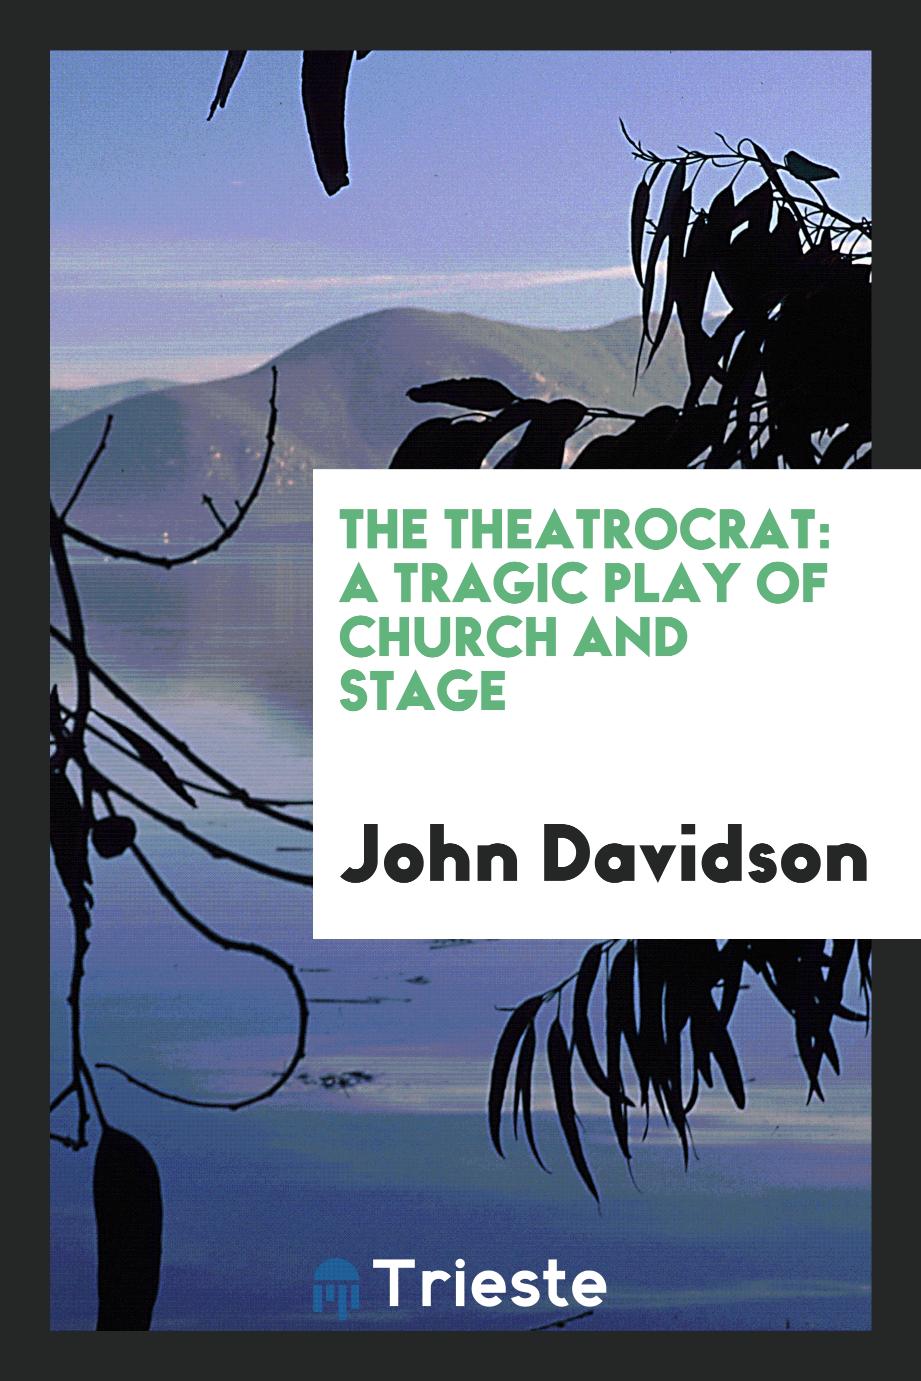 The Theatrocrat: A Tragic Play of Church and Stage